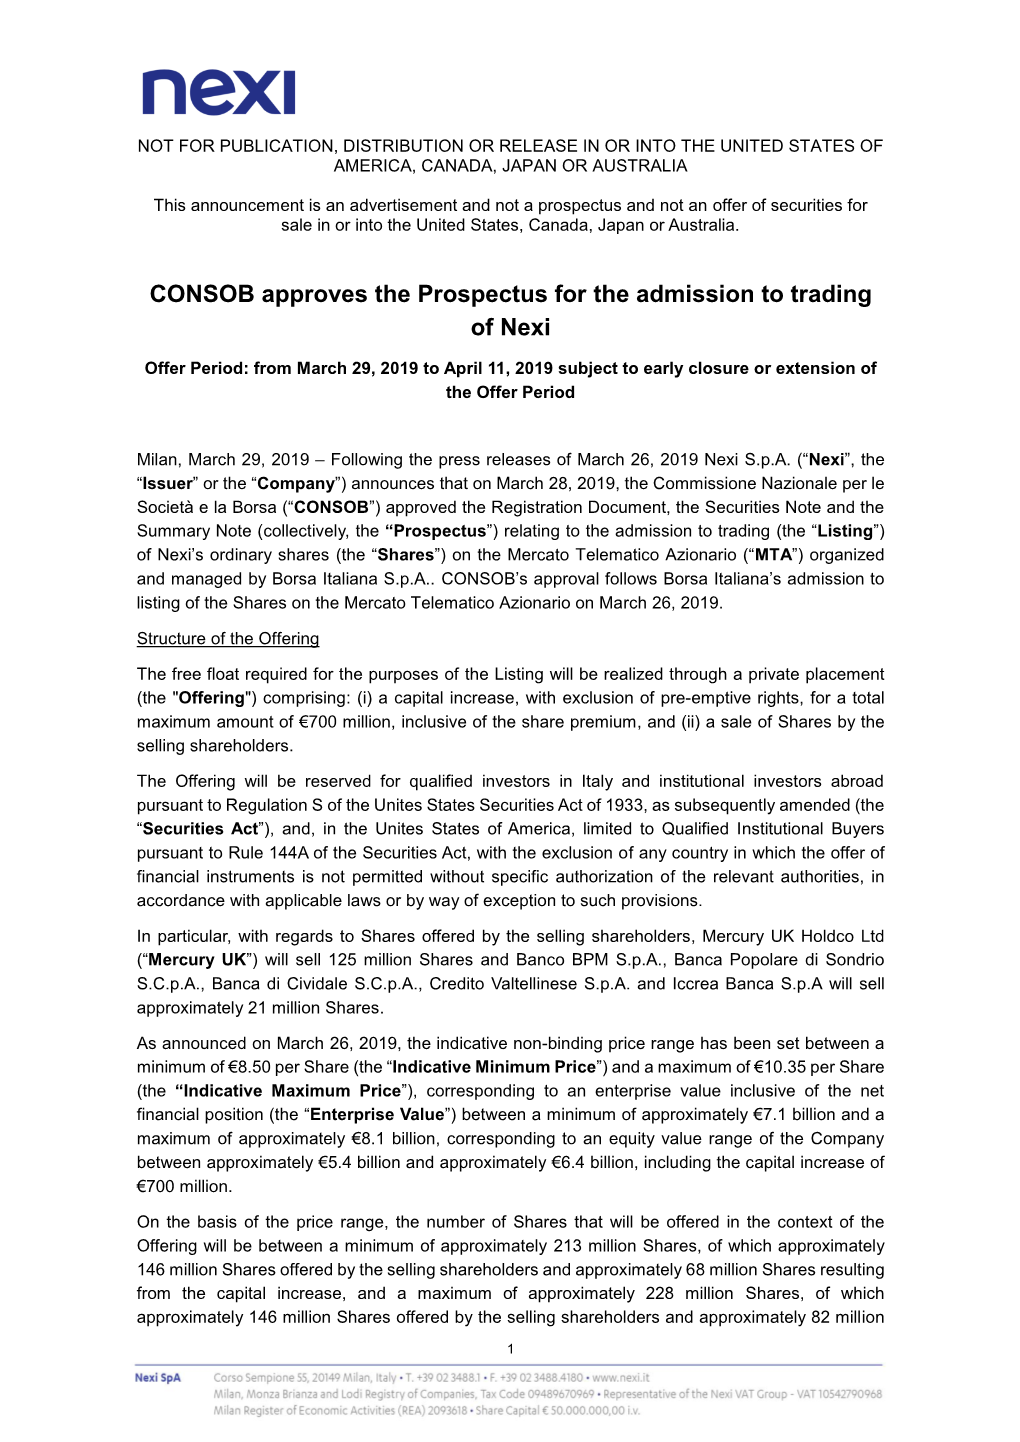 CONSOB Approves the Prospectus for the Admission to Trading of Nexi